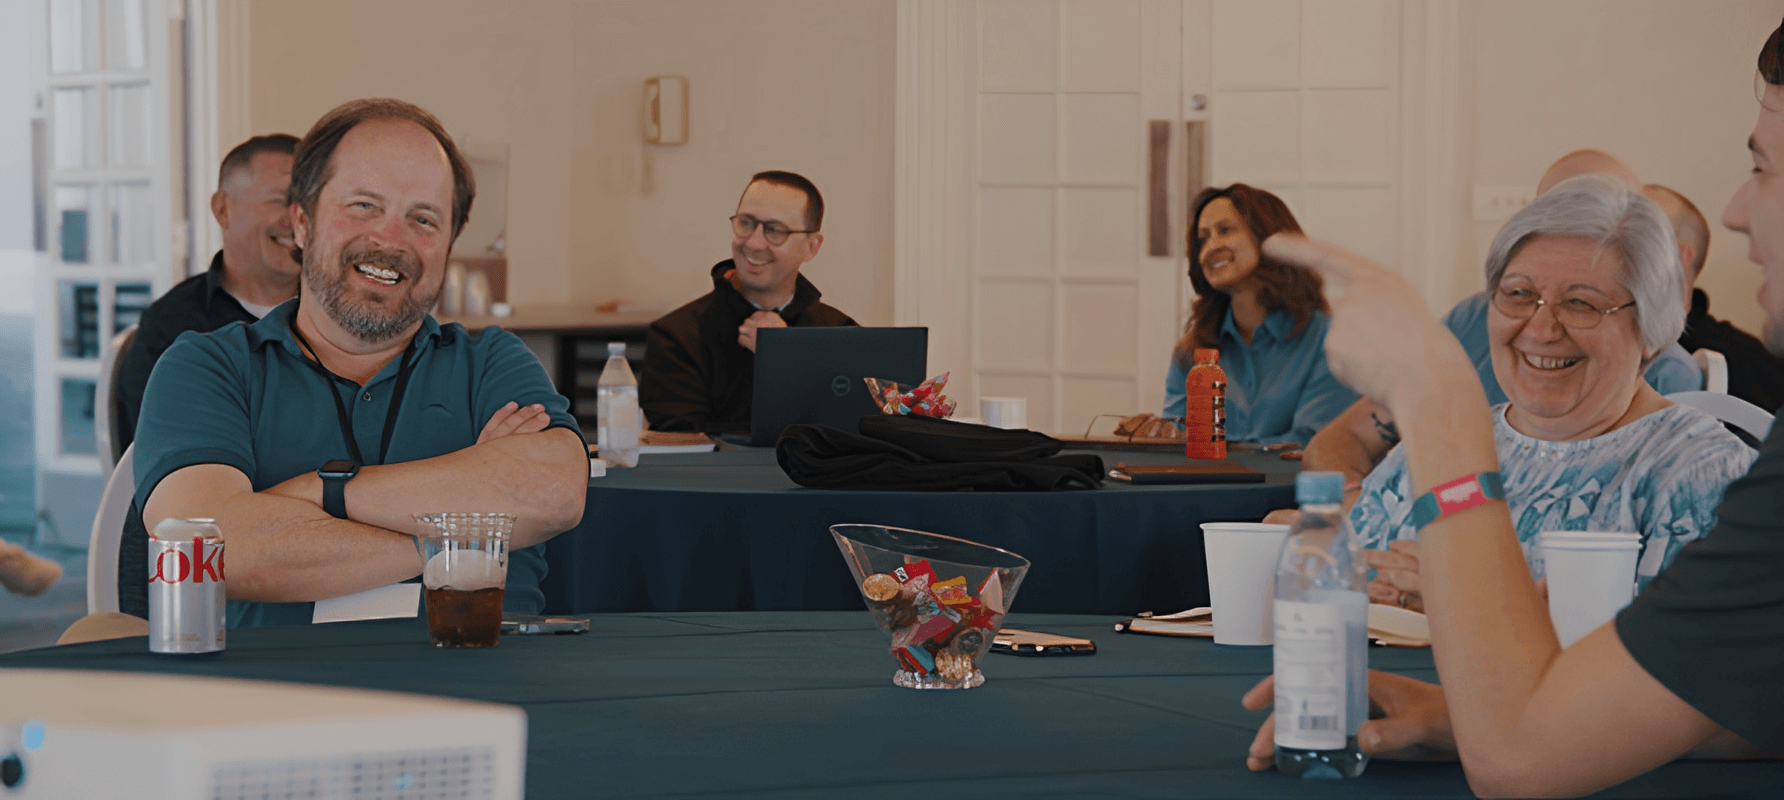 Volaris Group Leader, Trey Drake, Tribute President, Susie Hopper, and other software leaders sharing some laughs at the 2023 VBU Leader Summit.